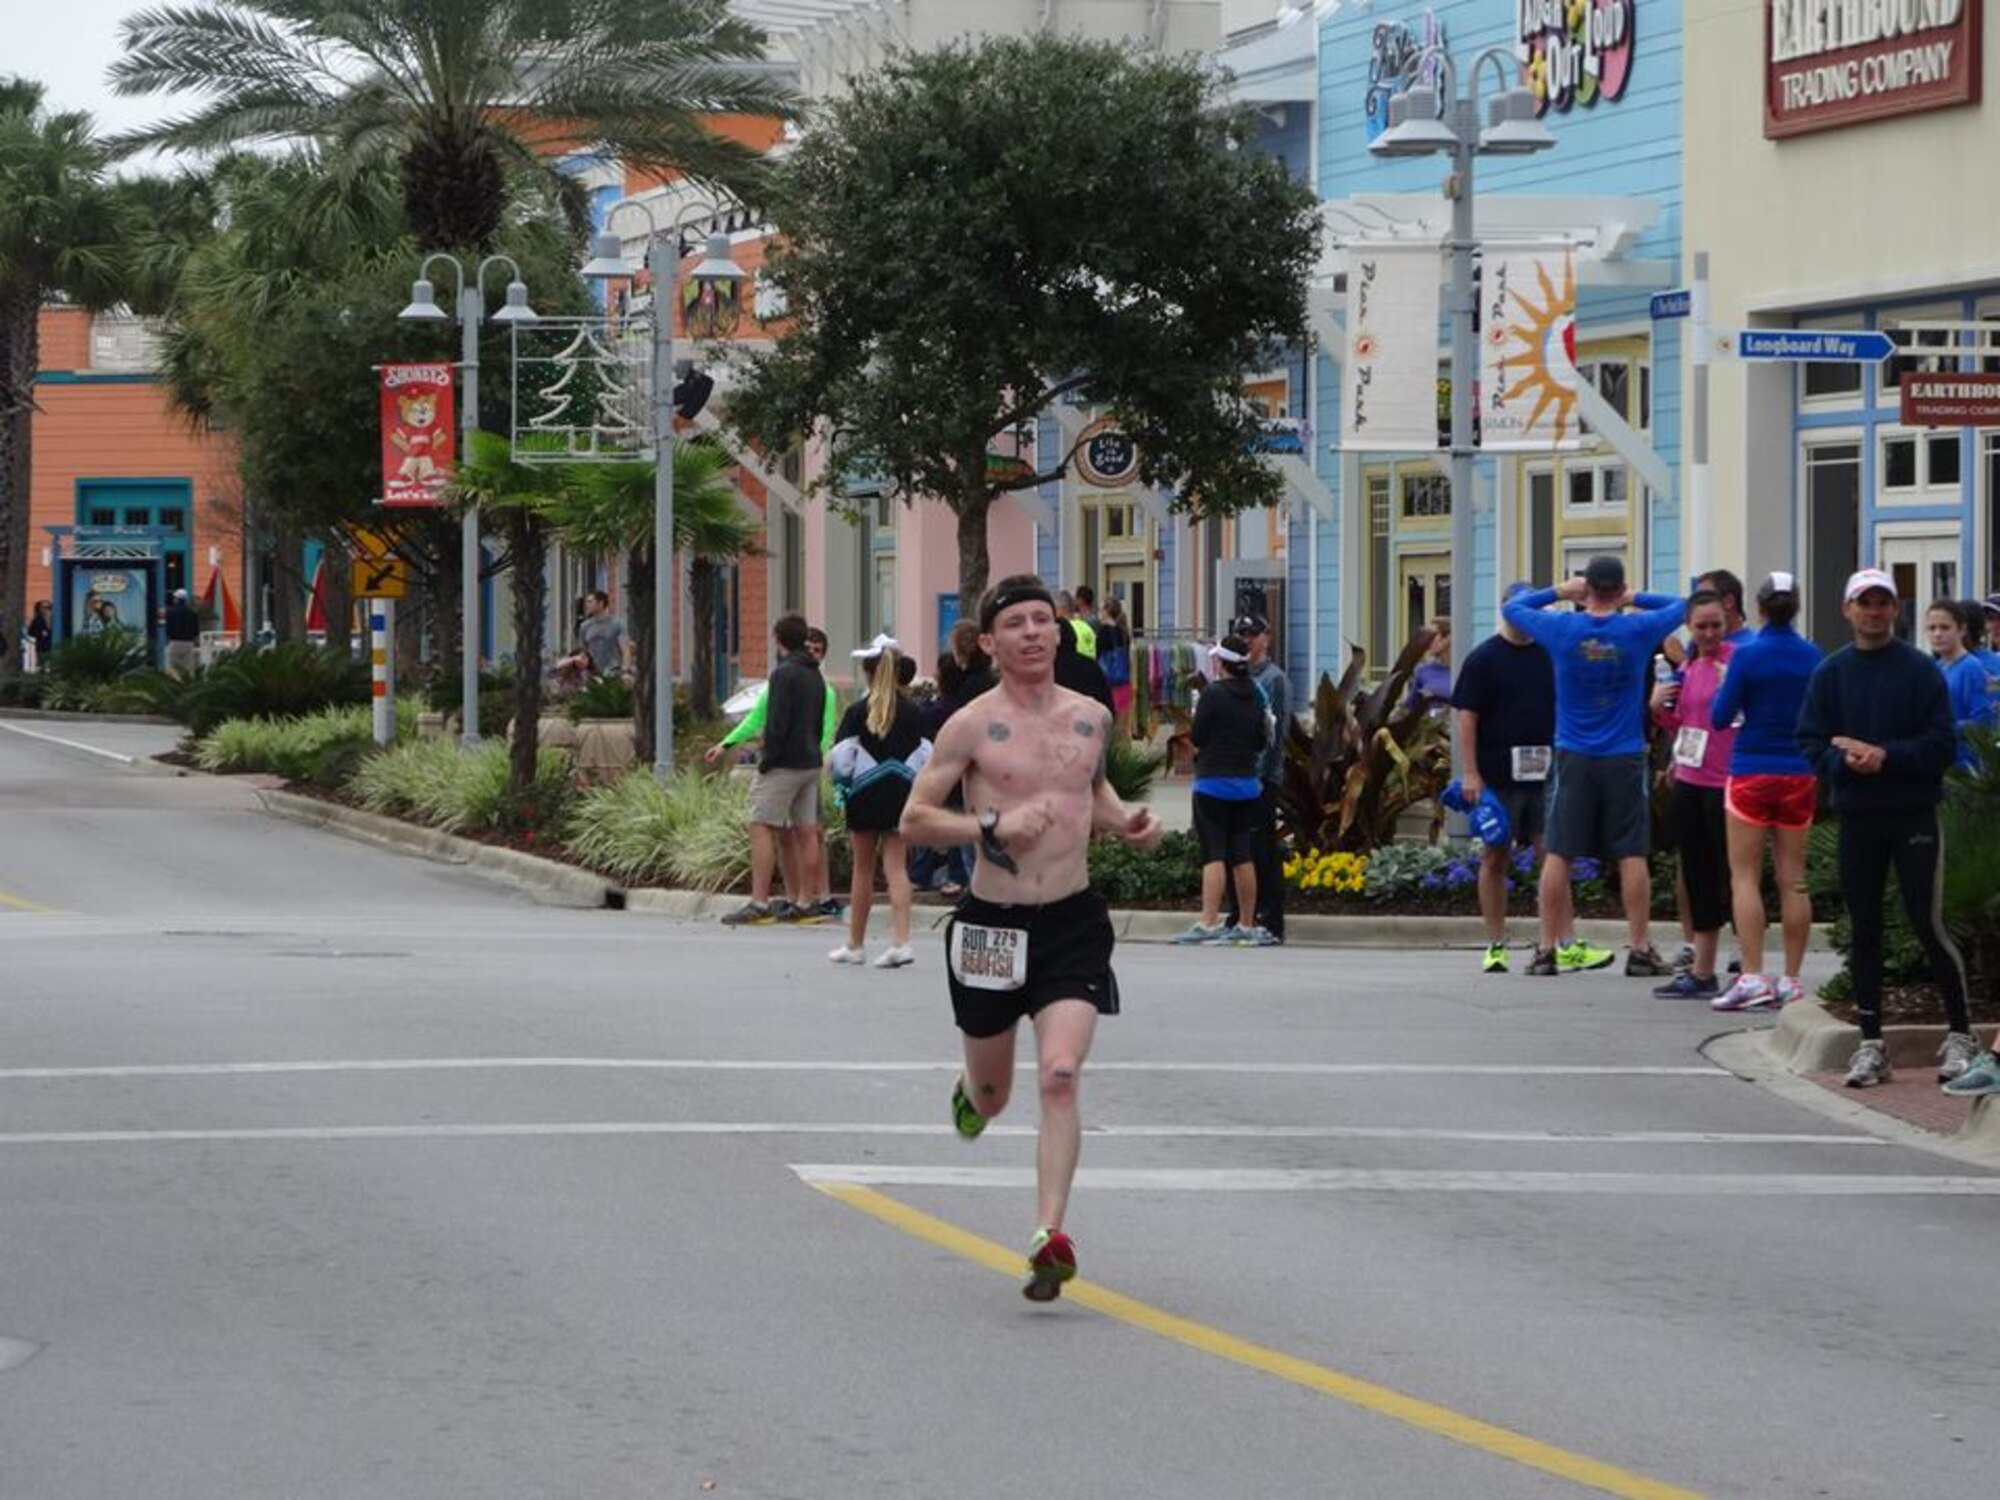 TSgt. Blaine Truman, 43rd Aircraft Maintenance Unit F22 flightline expeditor, competes in the 2013 Run for Redfish Point in Panama City Beach, Fla. (U.S. Air Force courtesy photo)